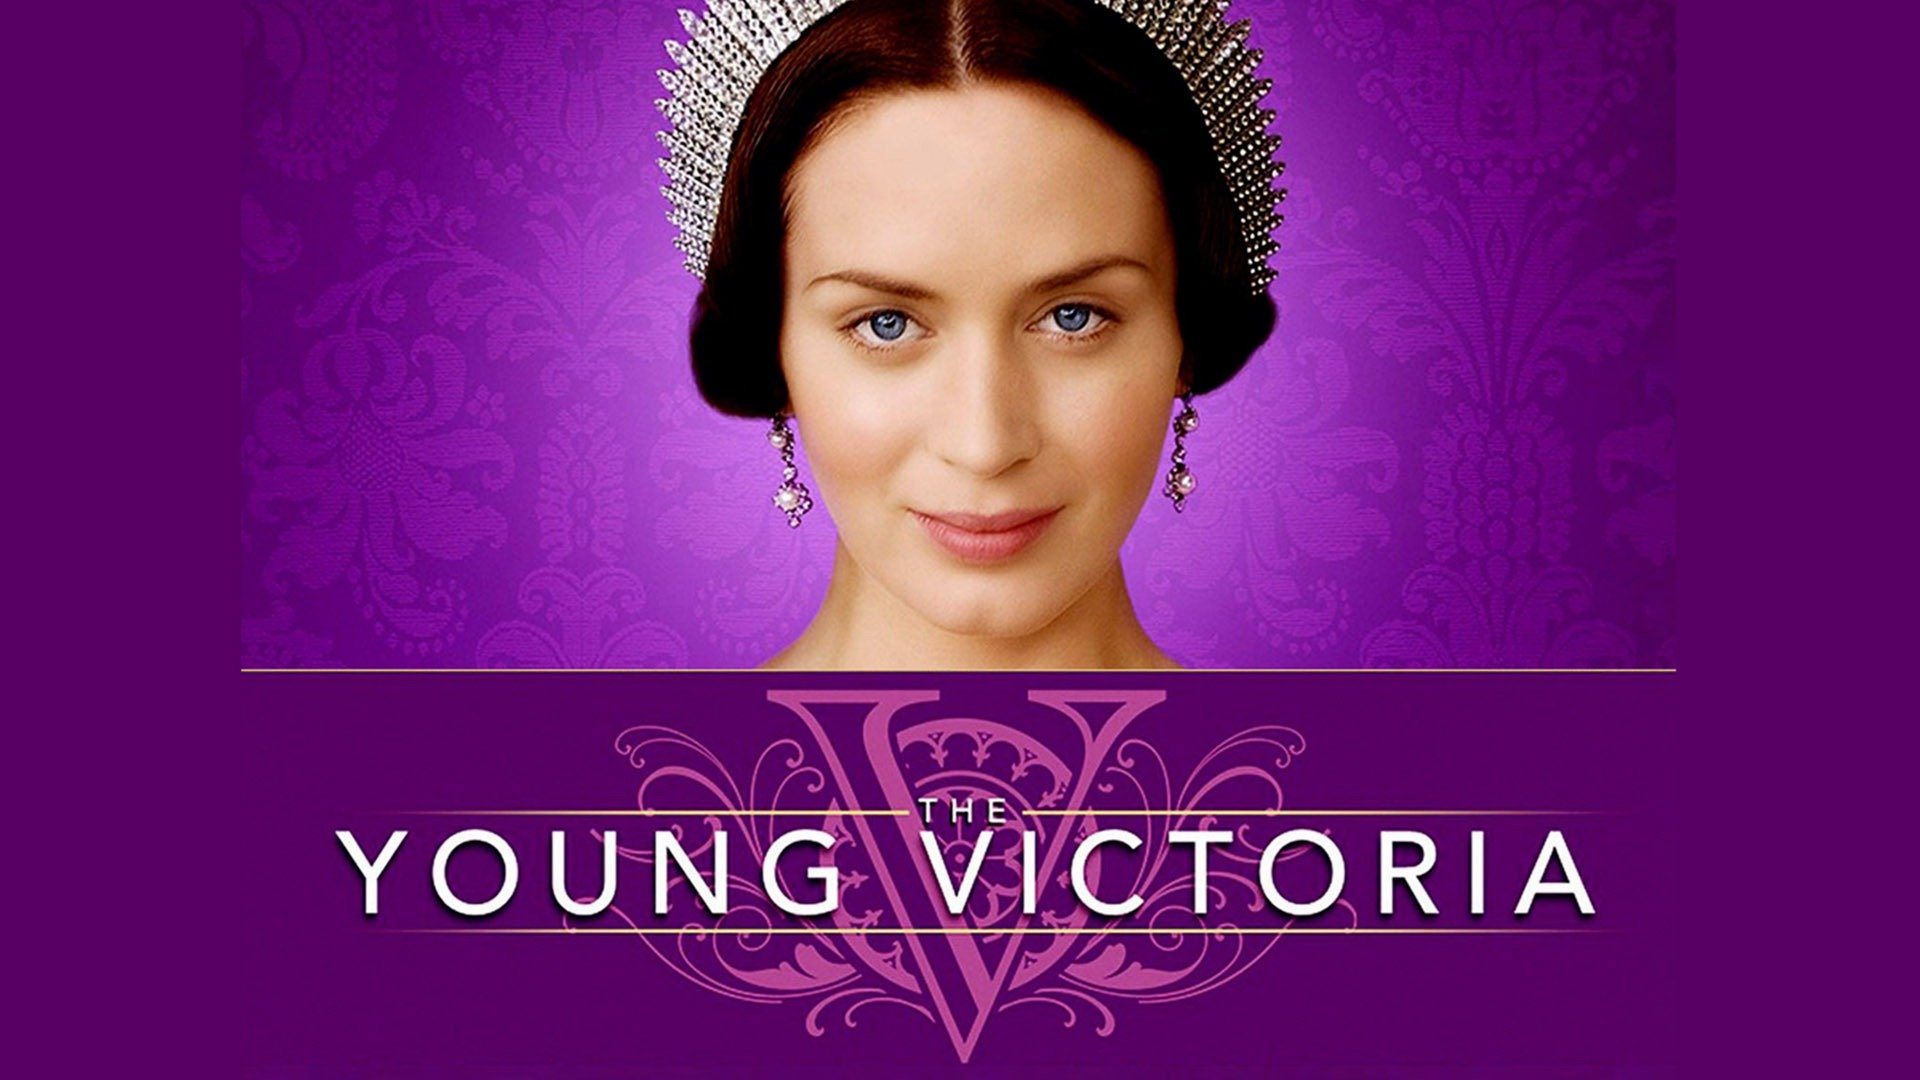 42-facts-about-the-movie-the-young-victoria